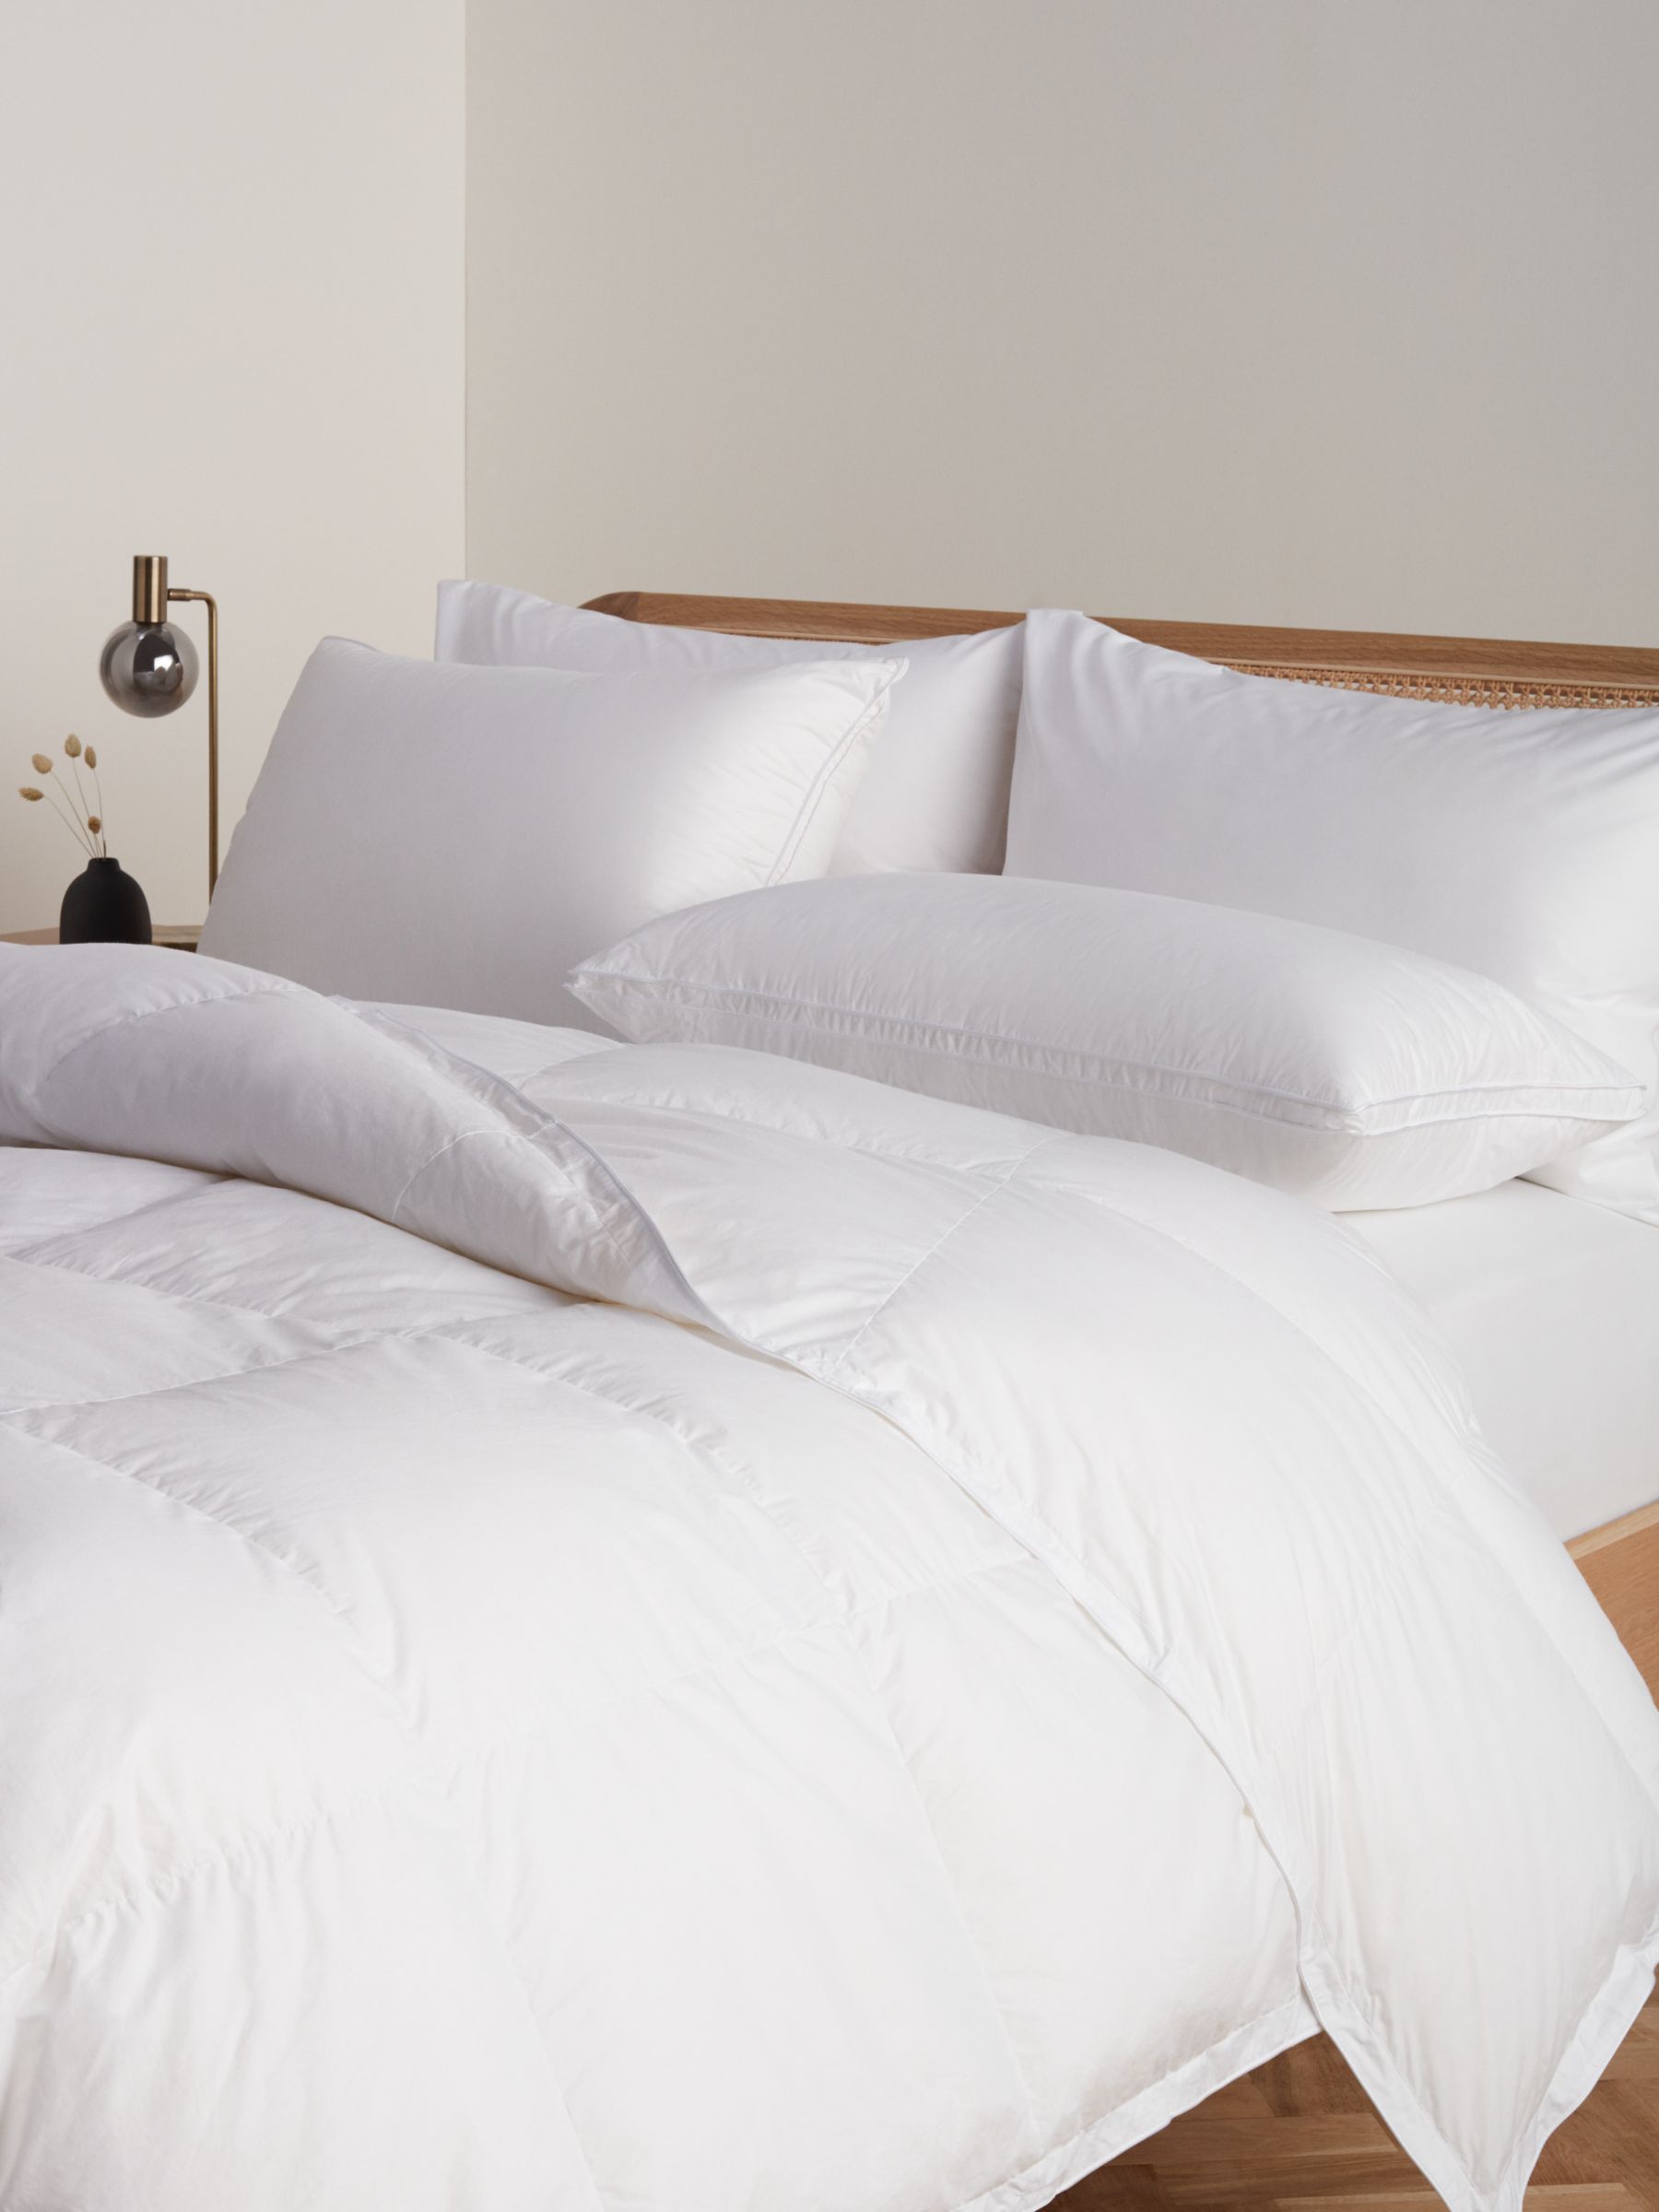 How To Choose The Right Duvet, Is There A Duvet Larger Than King Size Bed